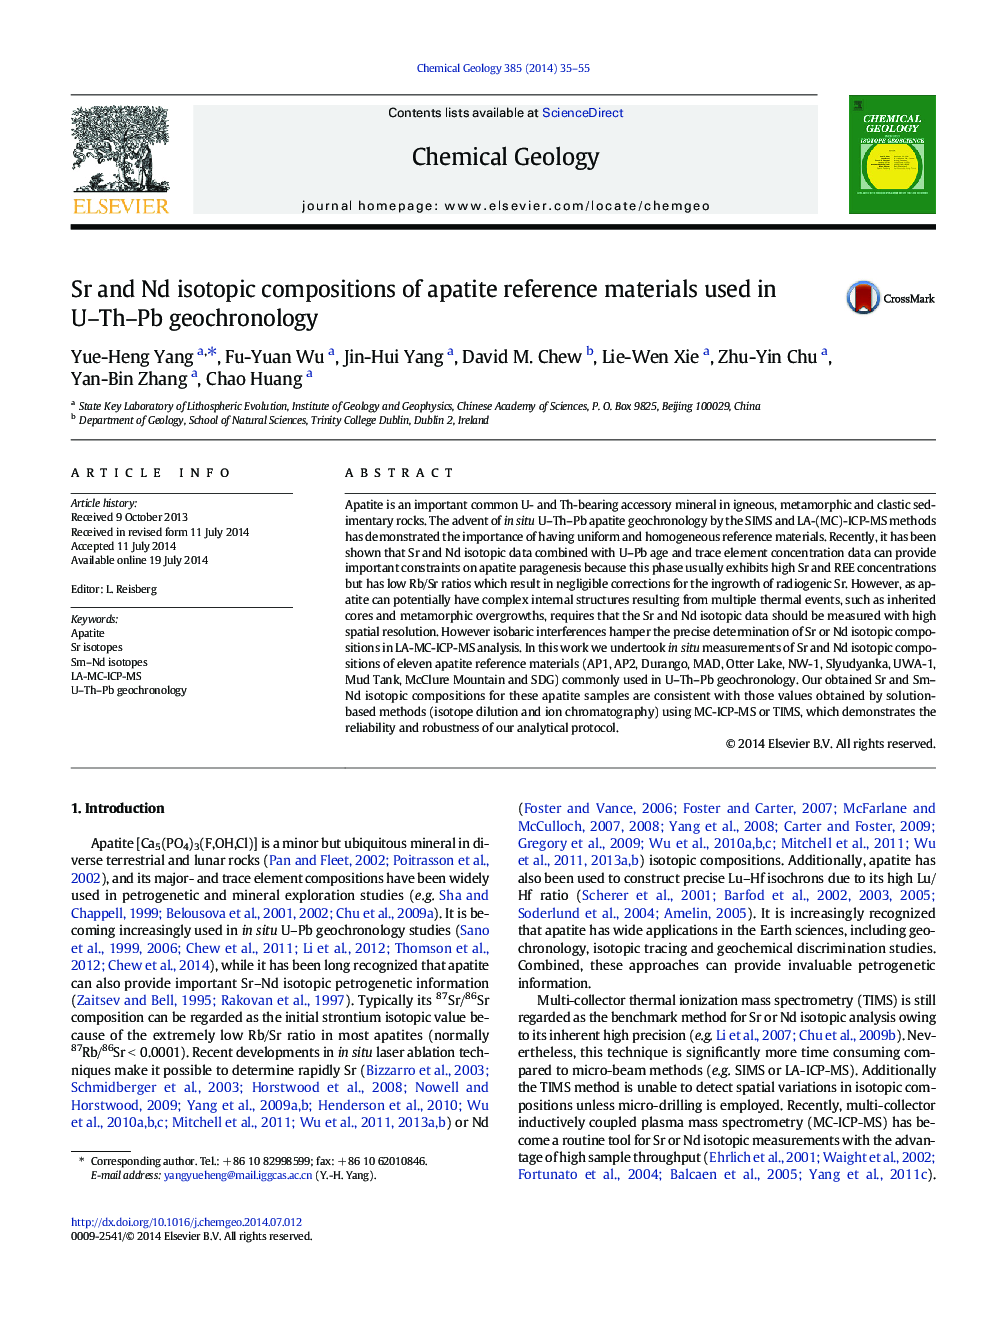 Sr and Nd isotopic compositions of apatite reference materials used in U–Th–Pb geochronology